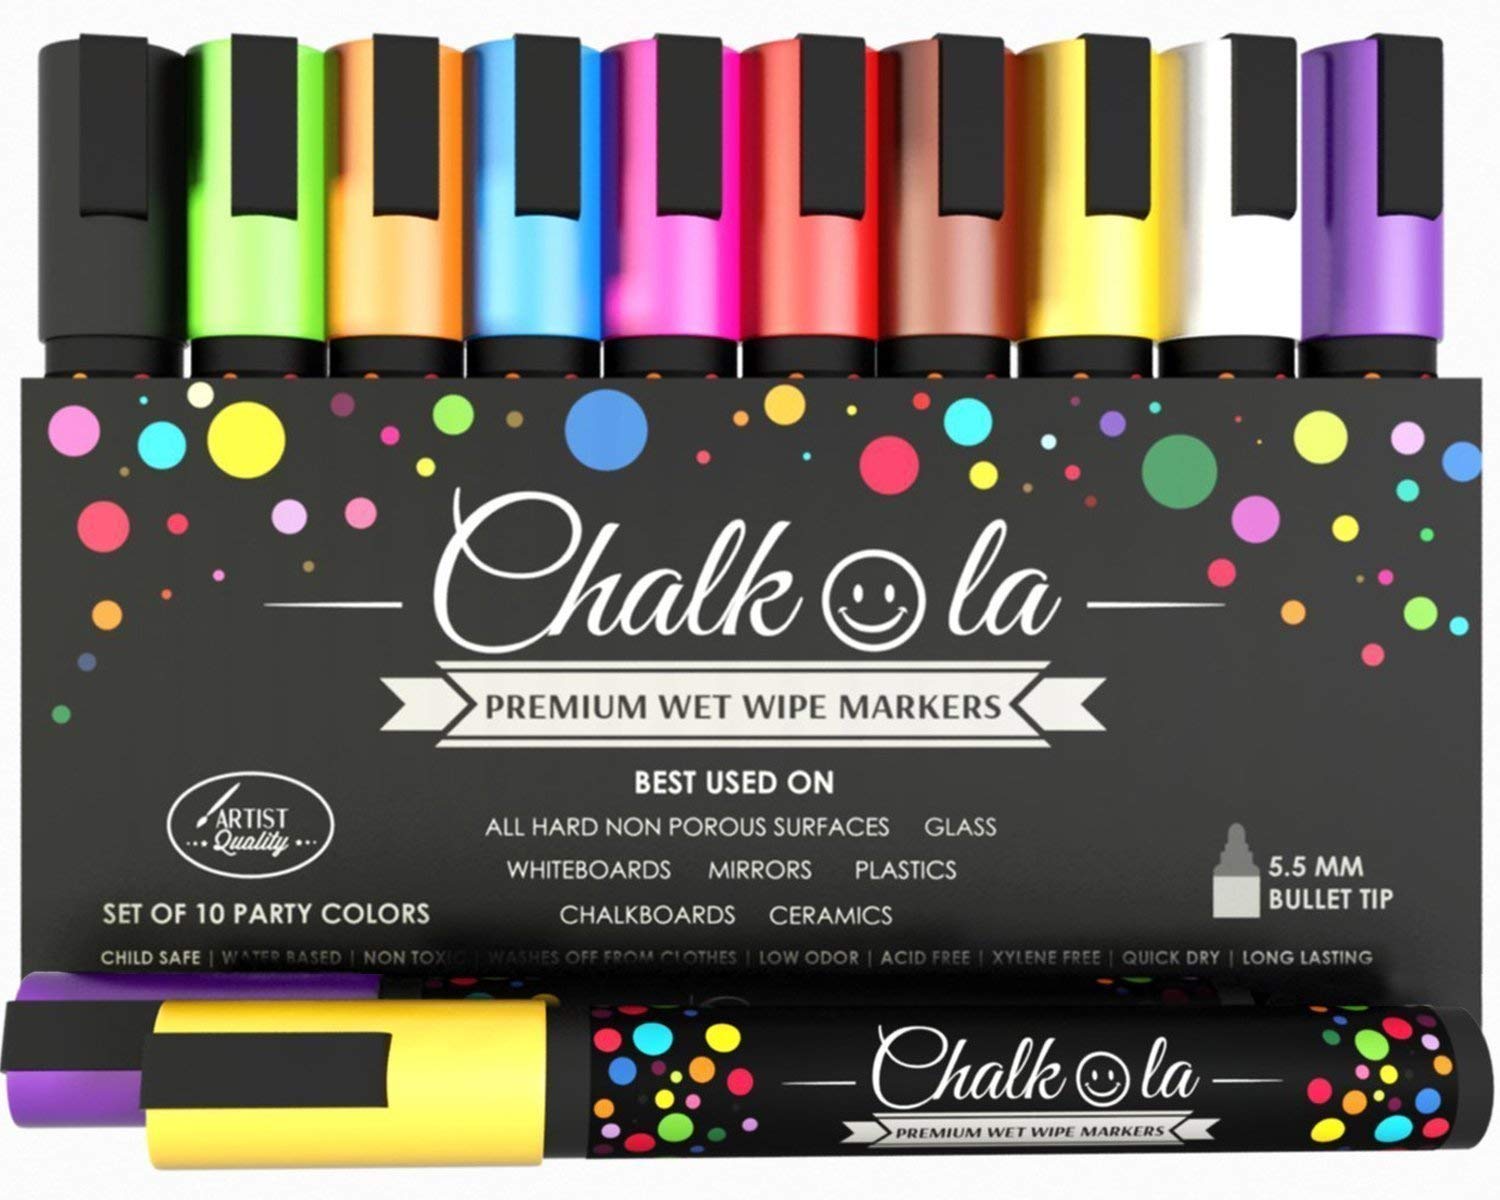 IJIANG Liquid Chalk Markers for Chalkboard Pastel Colors Wet Erase Pens with 6mm Reversible Tip for Blackboard, Whiteboard, Windows, Glass, Mirror, Si